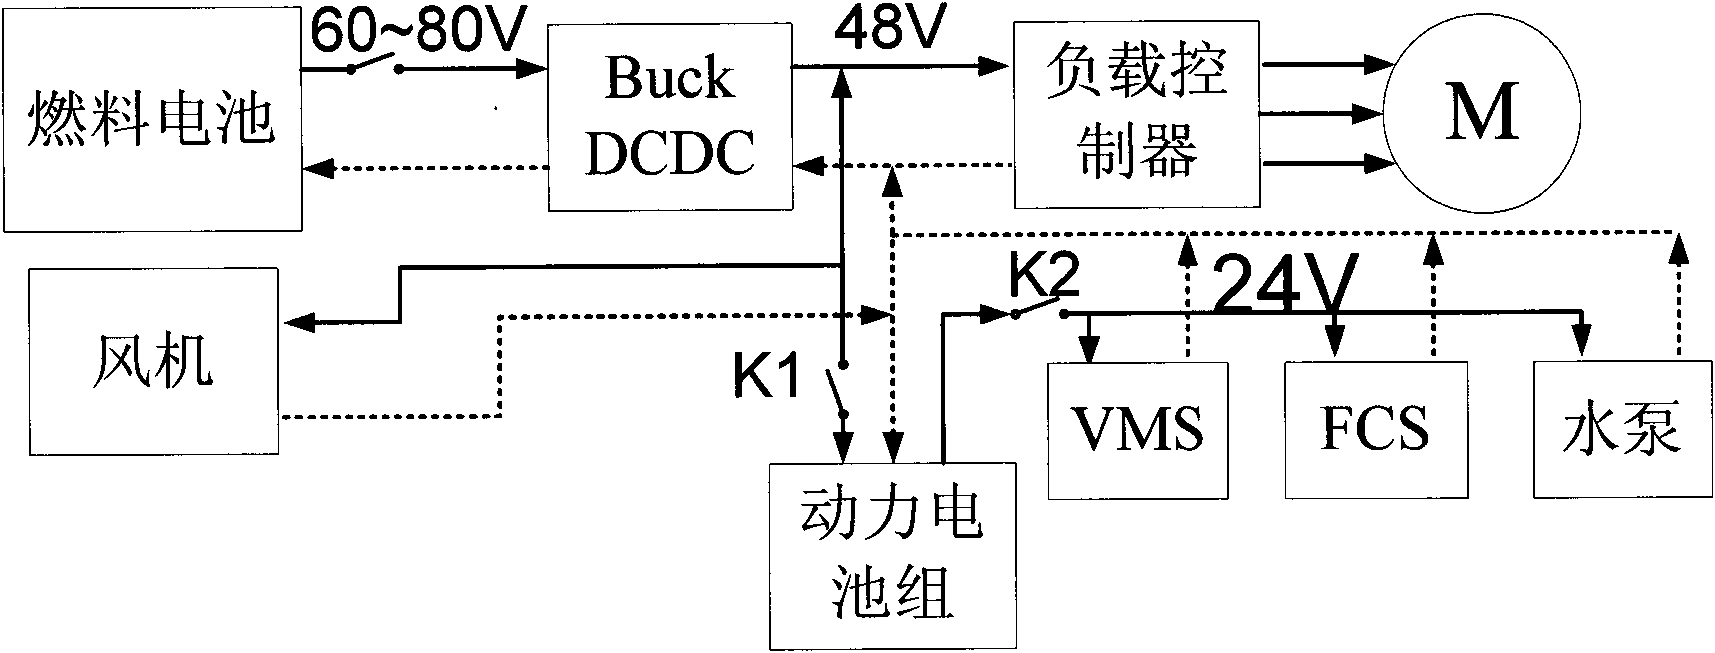 Energy management system of mixed power device based on fuel cell